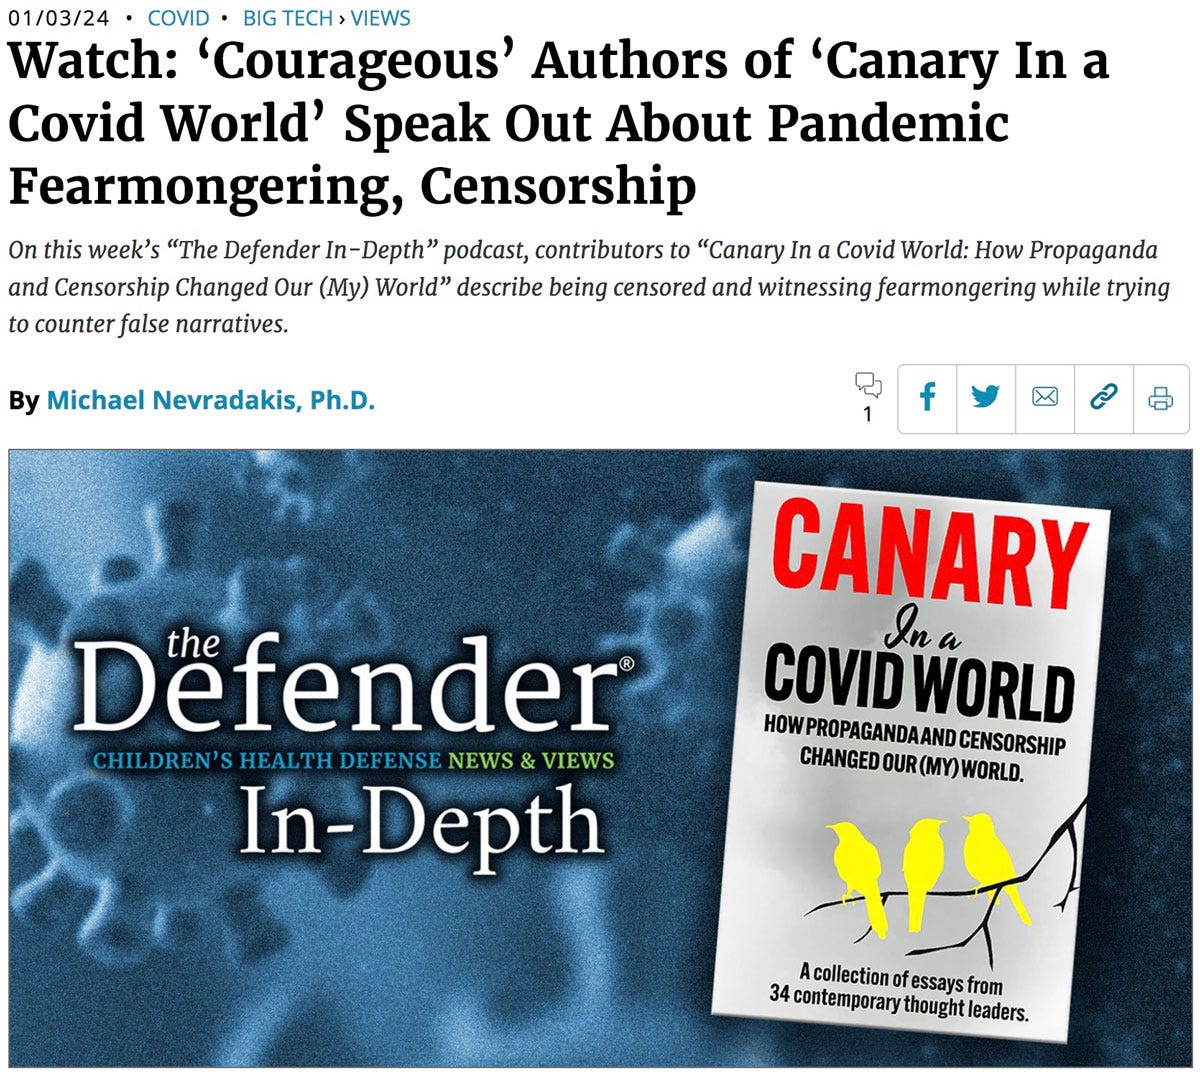 Children's Health Defense: The Defender Article on Canary in a COVID World Podcast